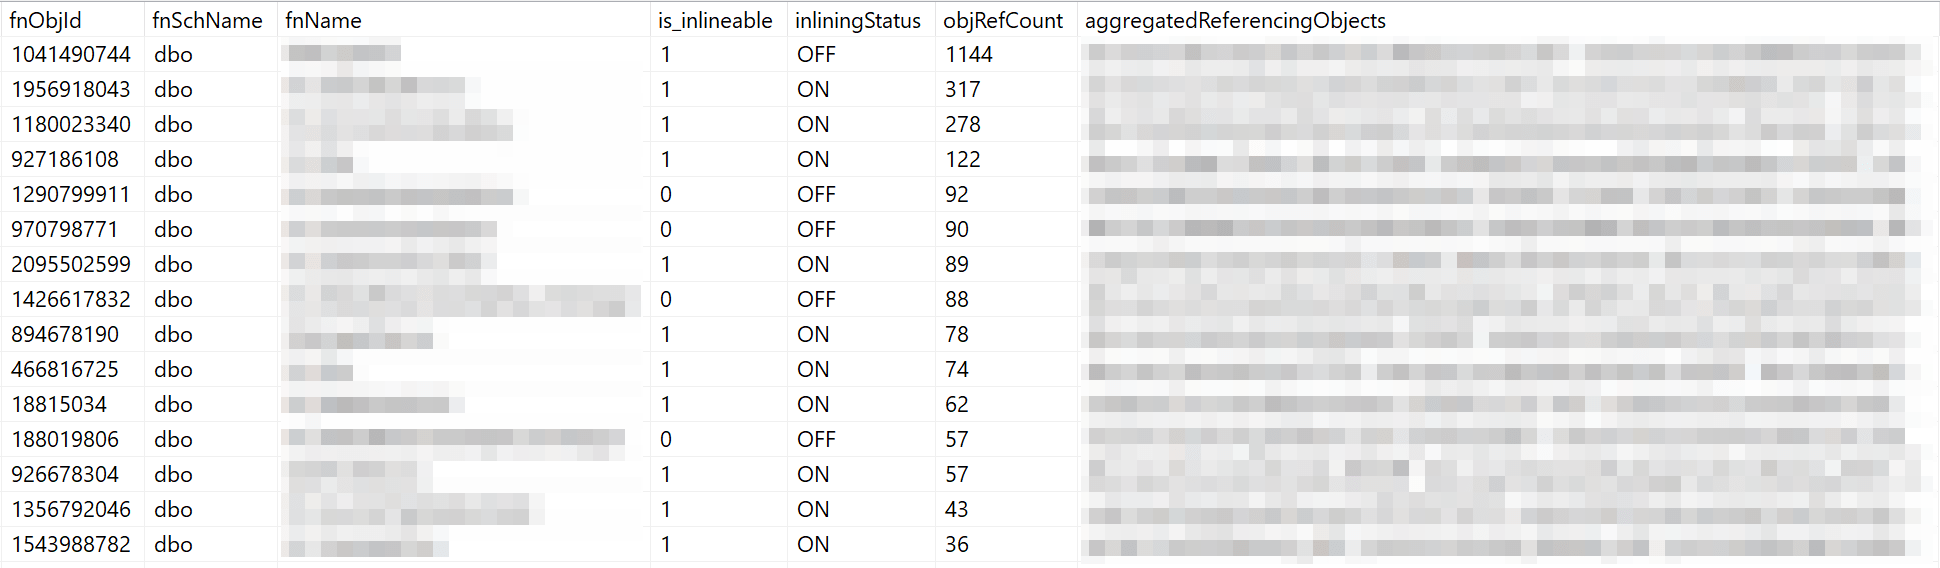 Find UDF reference counts and objects